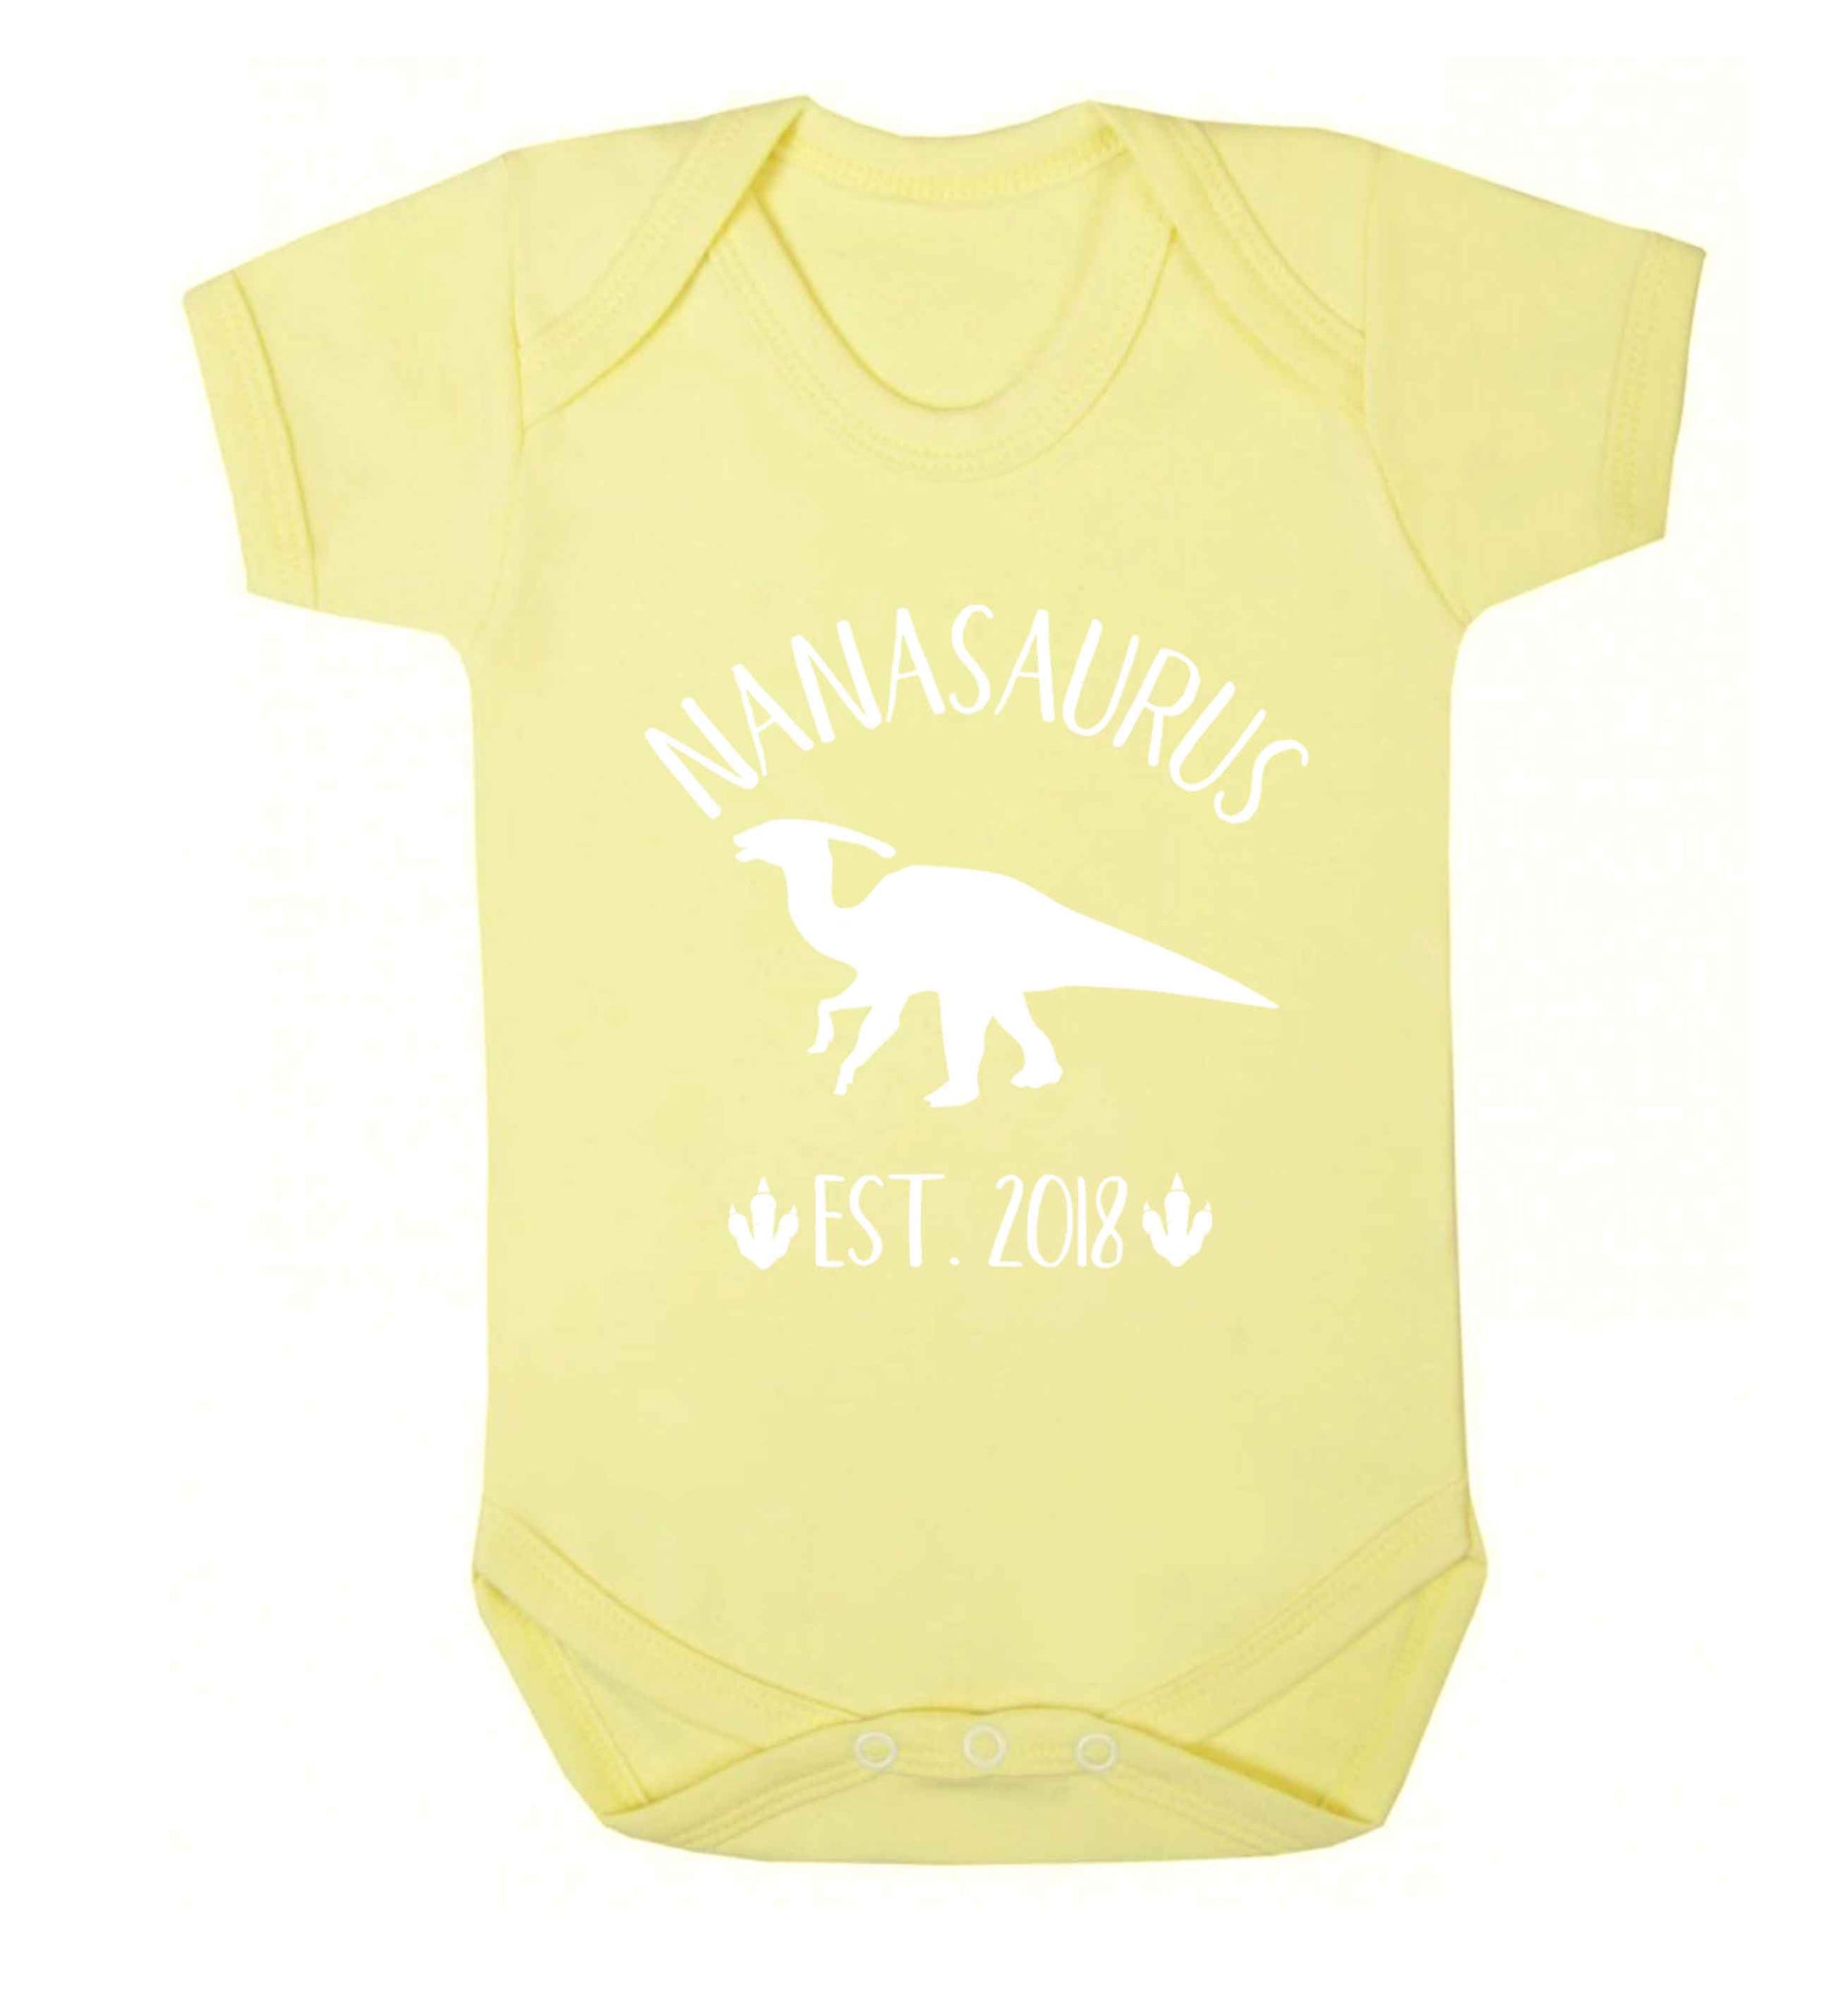 Personalised nanasaurus since (custom date) Baby Vest pale yellow 18-24 months